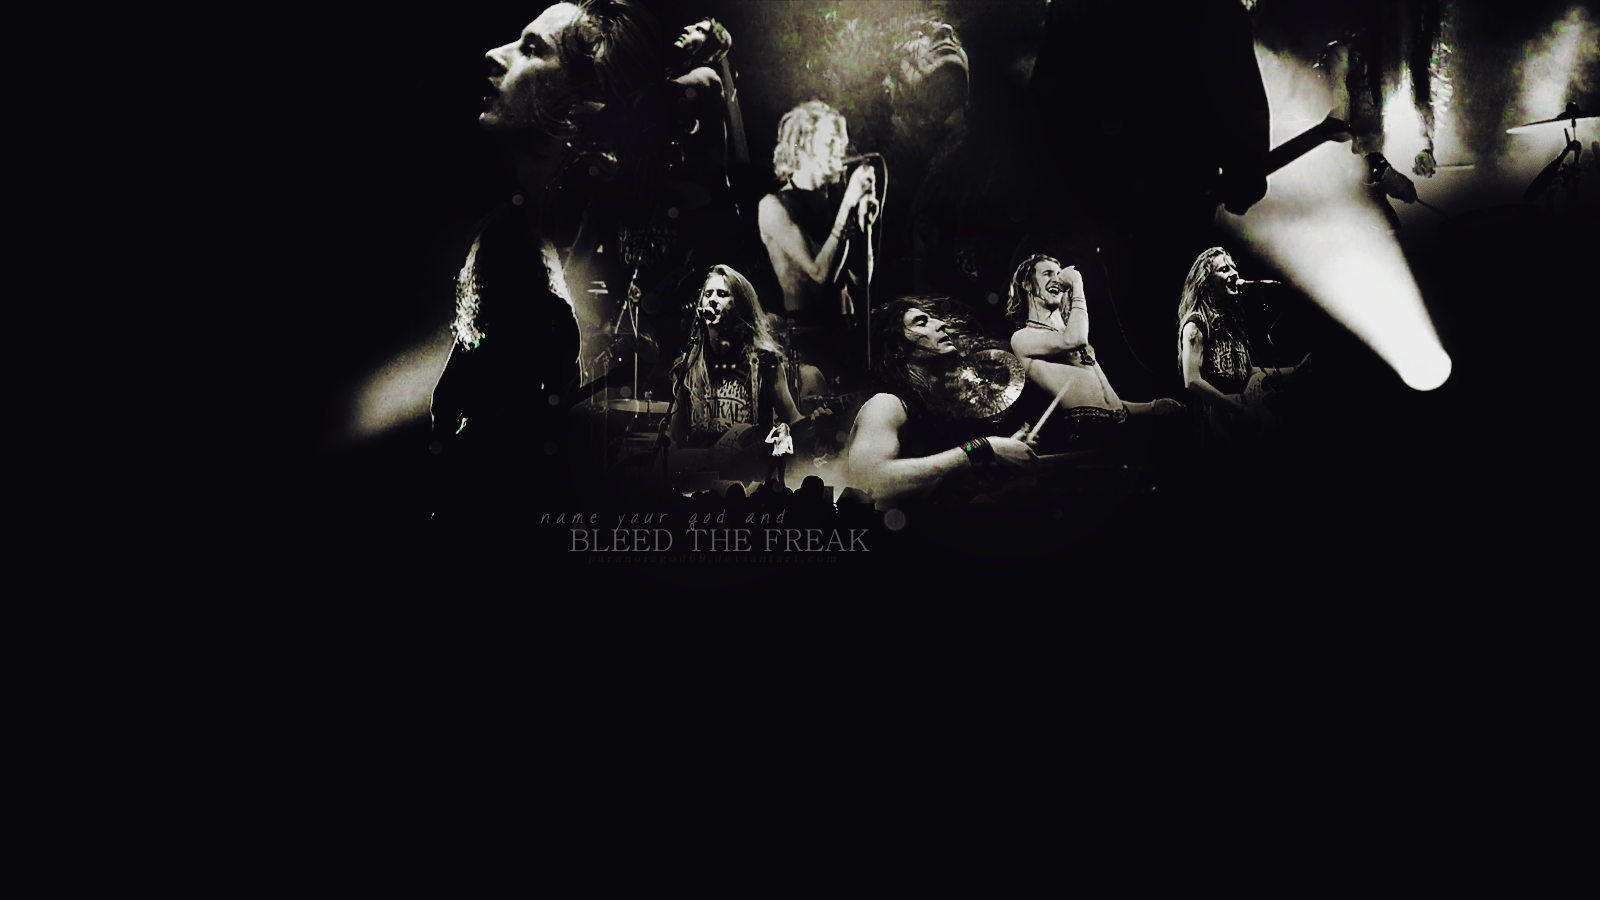 Alice In Chains Bleed The Freak Wallpaper By Paranoiagod69 On